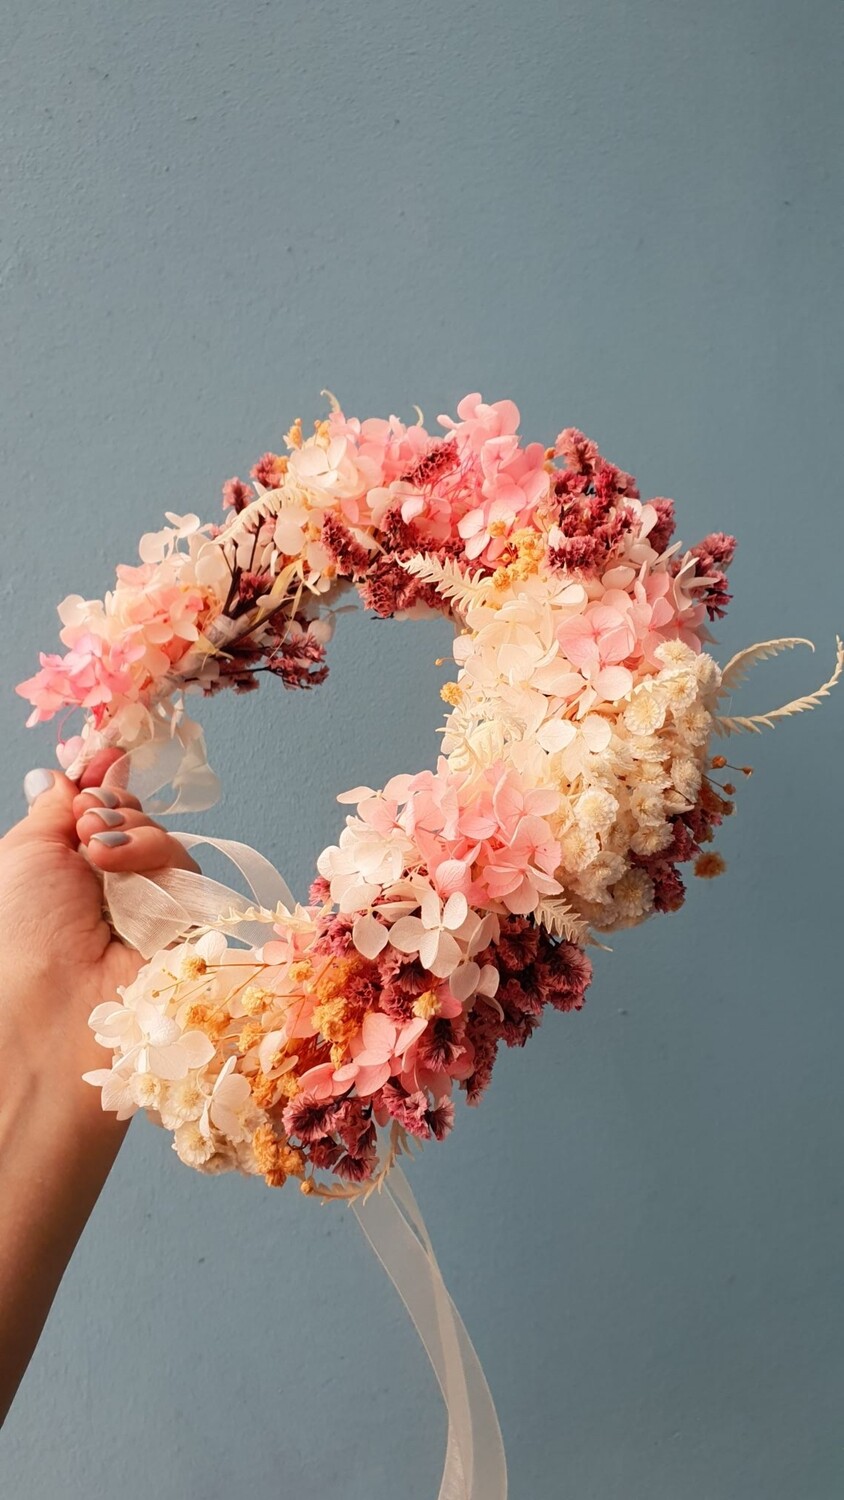 Wreath White and pink dried flowers head